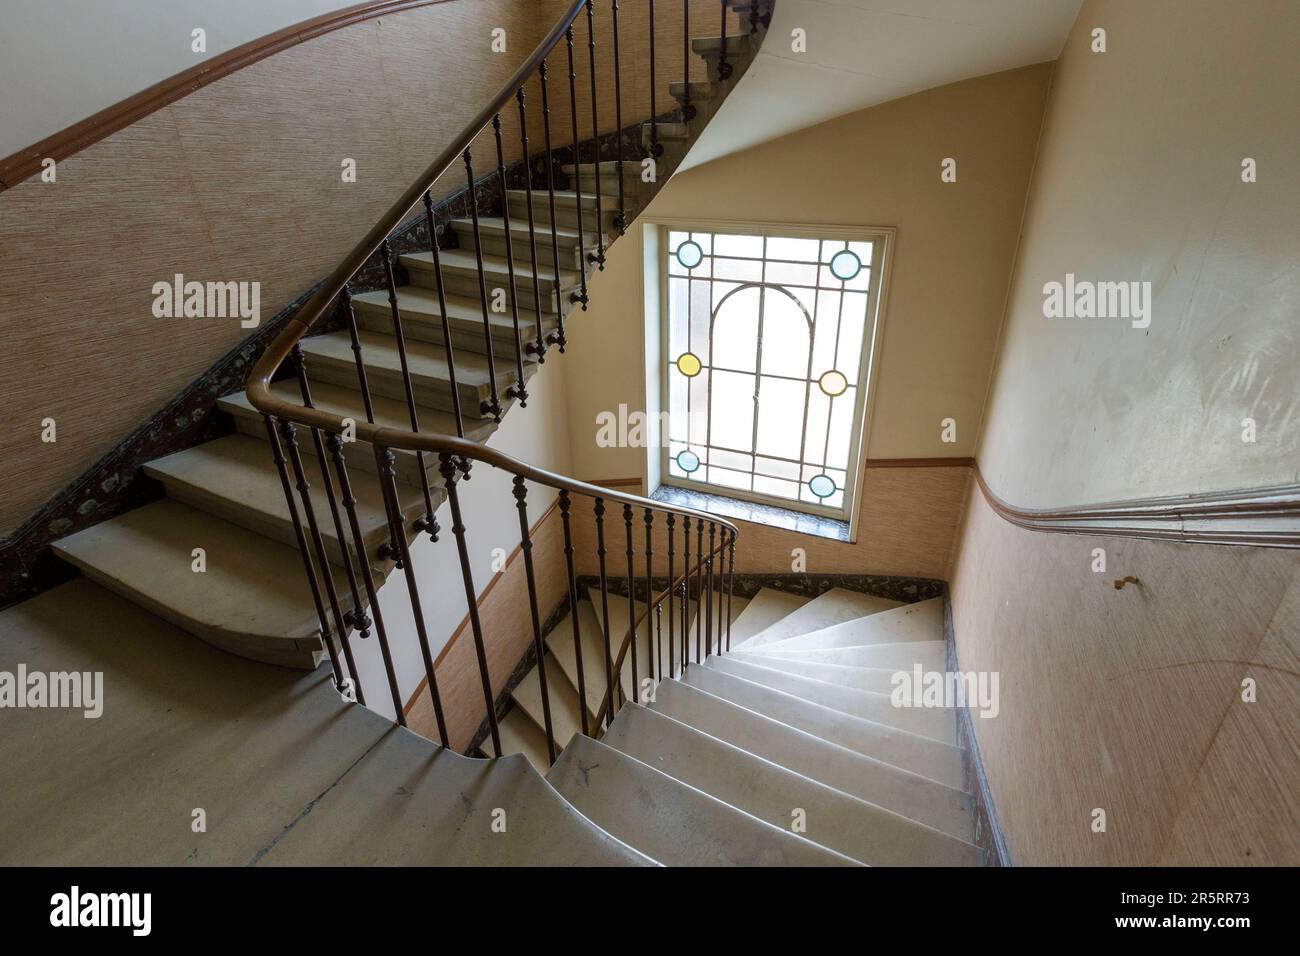 France, Meurthe et Moselle, Nancy, staircase of an apartment building built in the 1900's located Rue du Grand Verger Stock Photo